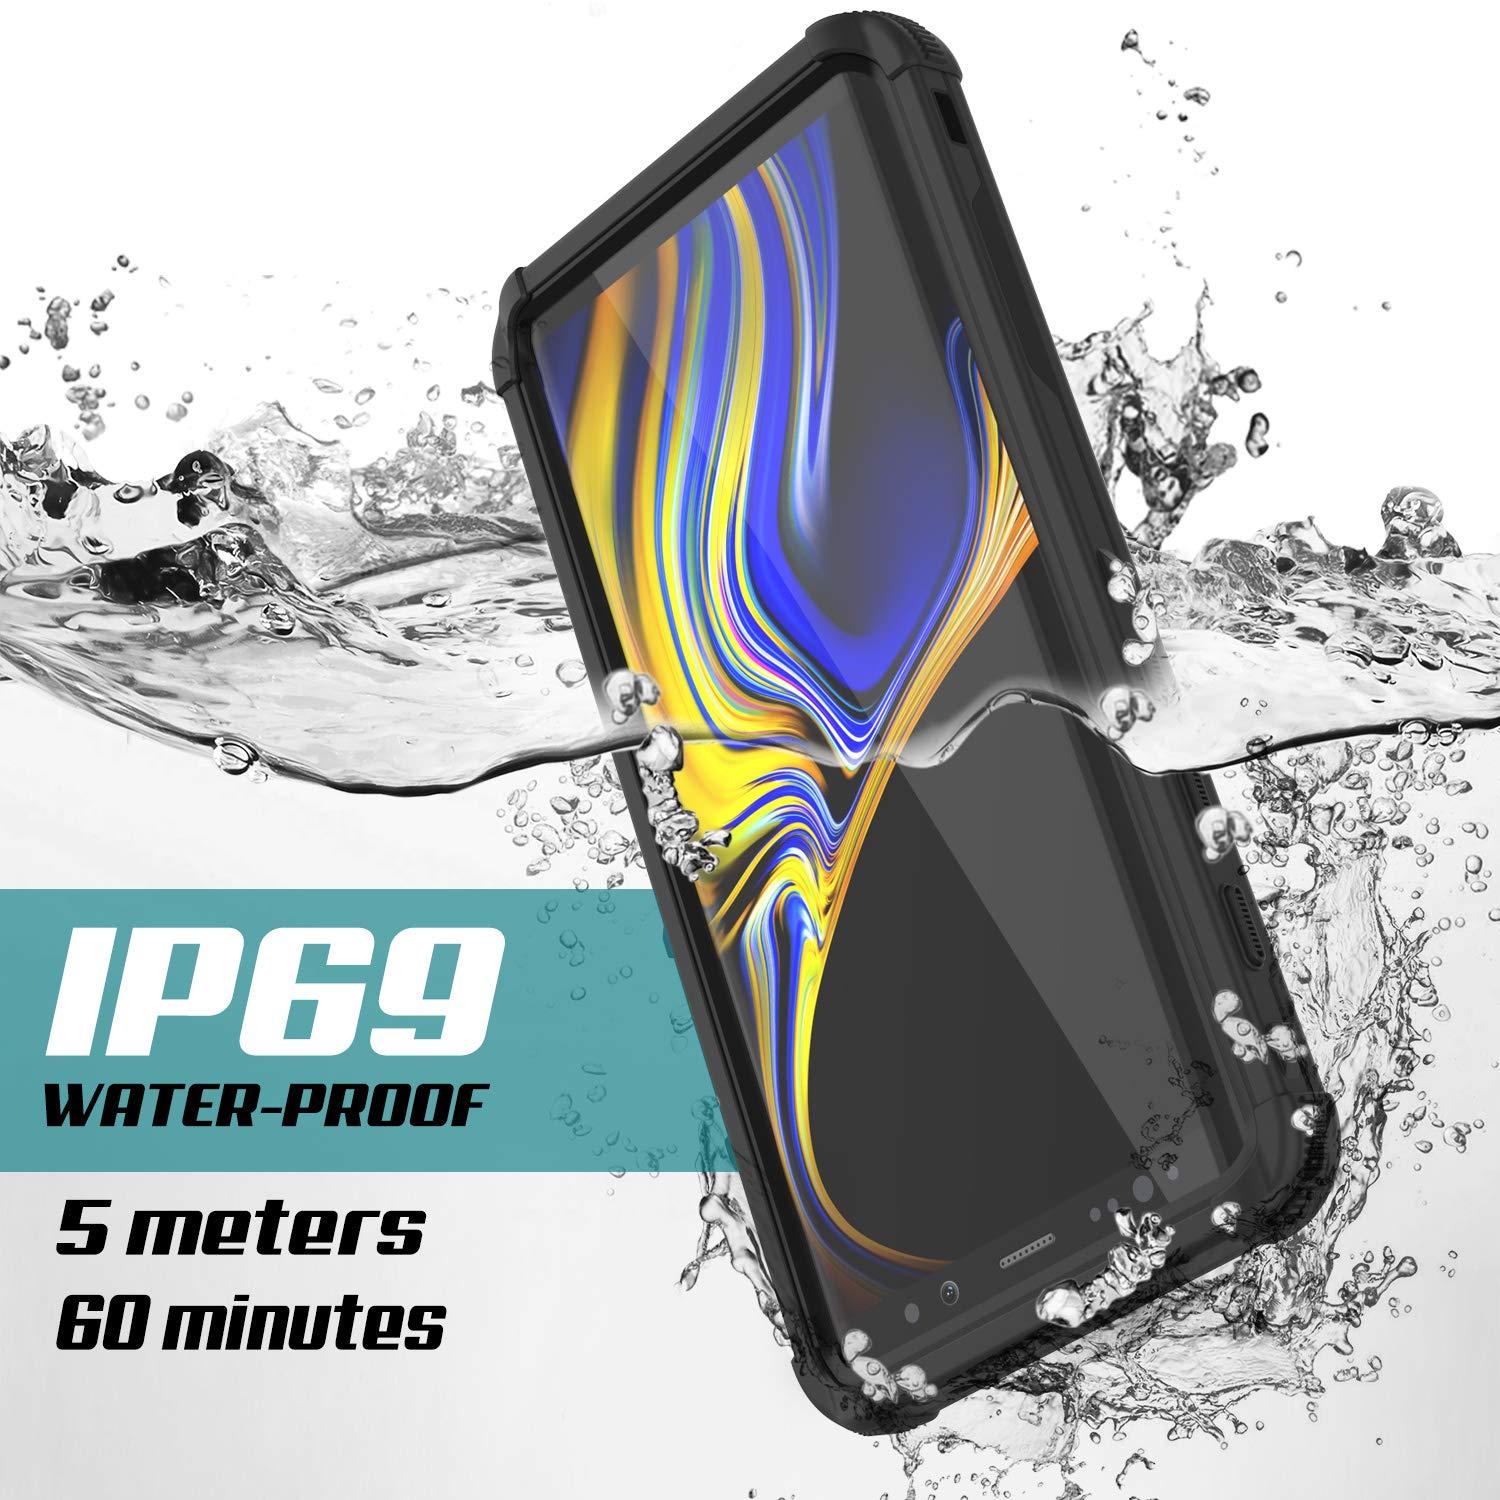 Punkcase Galaxy Note 9 Waterproof Case [Navy Seal Extreme Series] Armor Cover W/ Built In Screen Protector [Black]